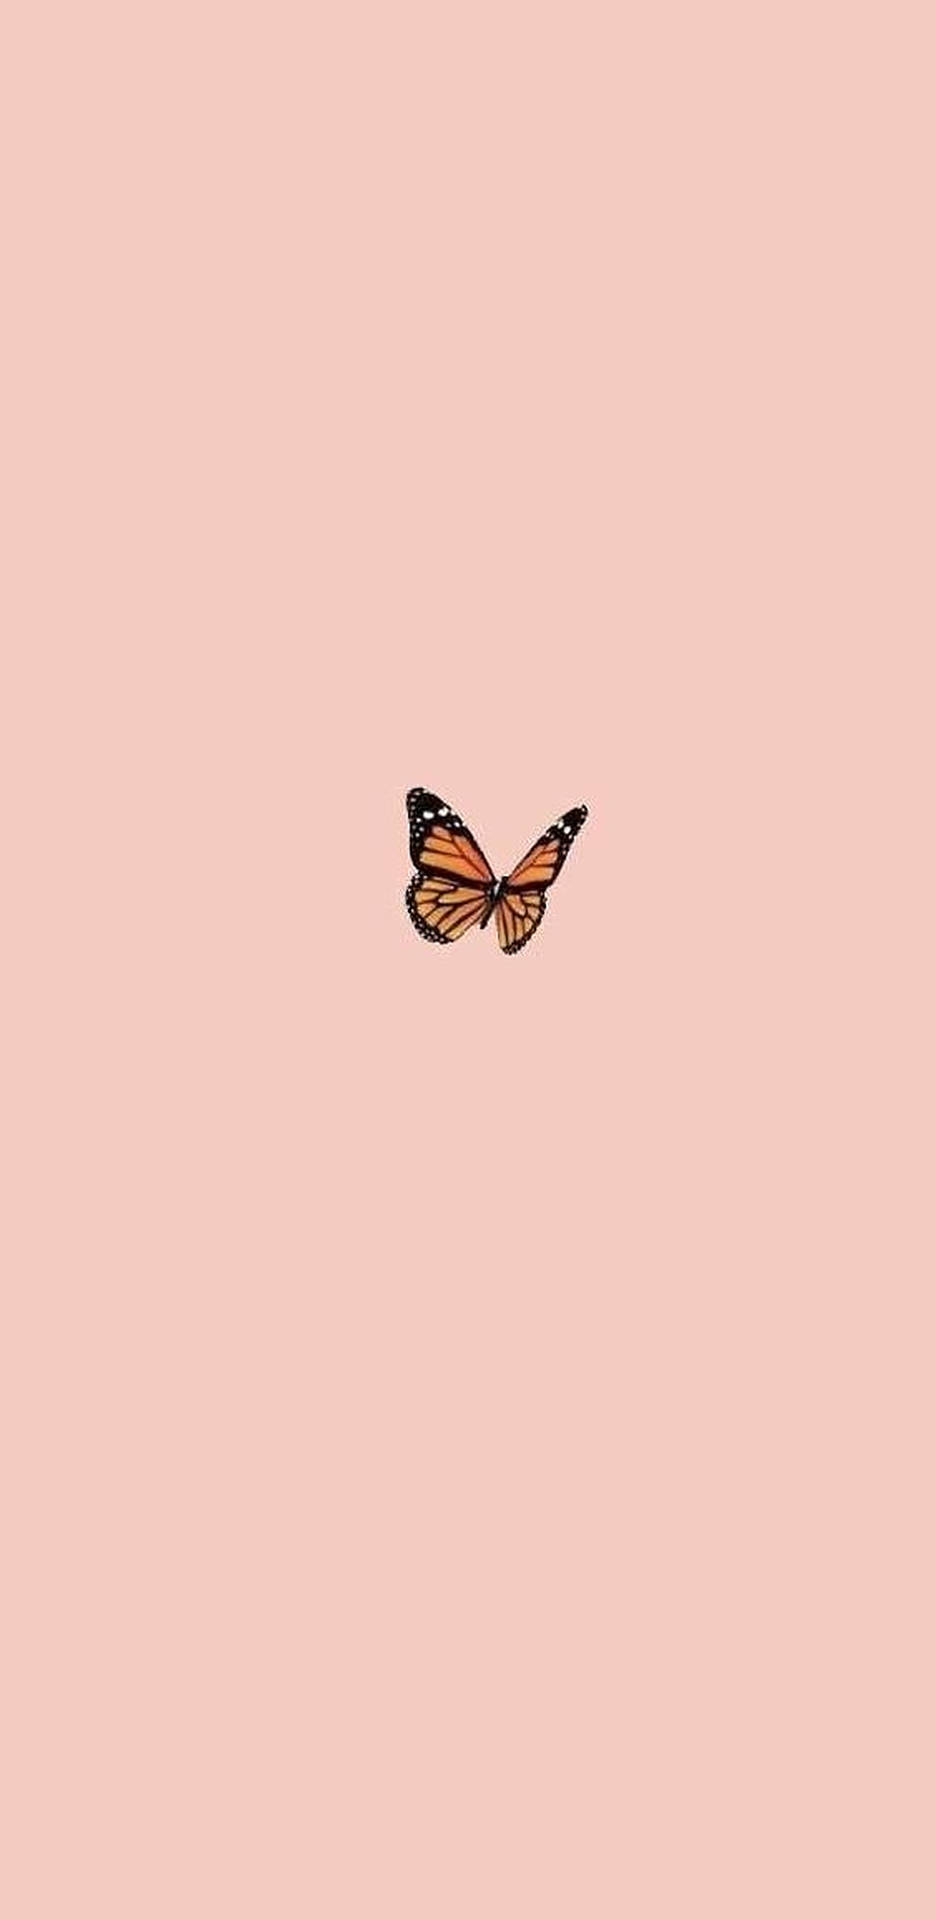 Iphone Aesthetic Butterfly Background